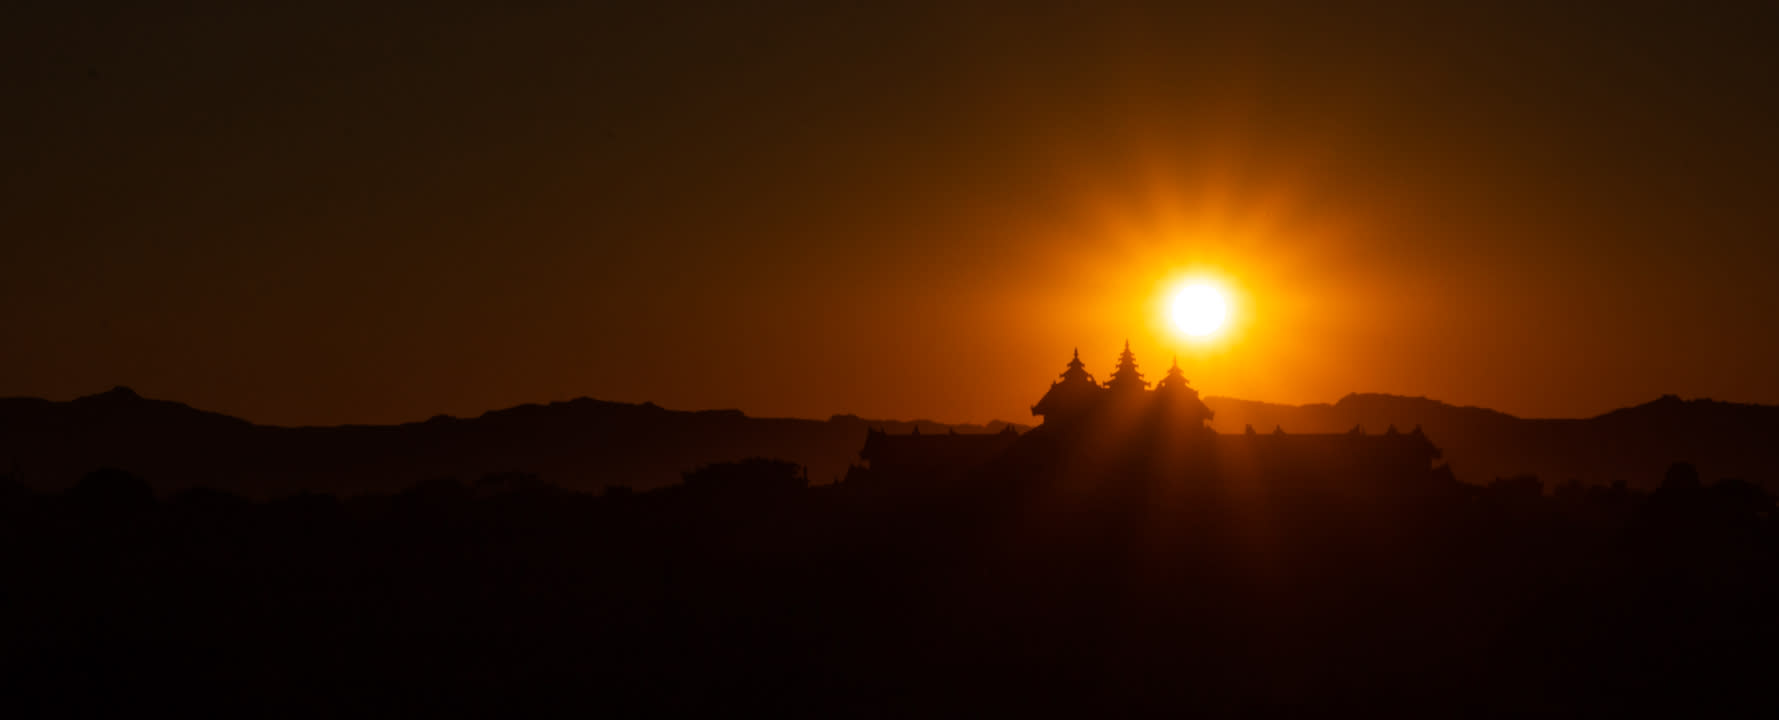 Silhouette of a palace in Bagan during sunset